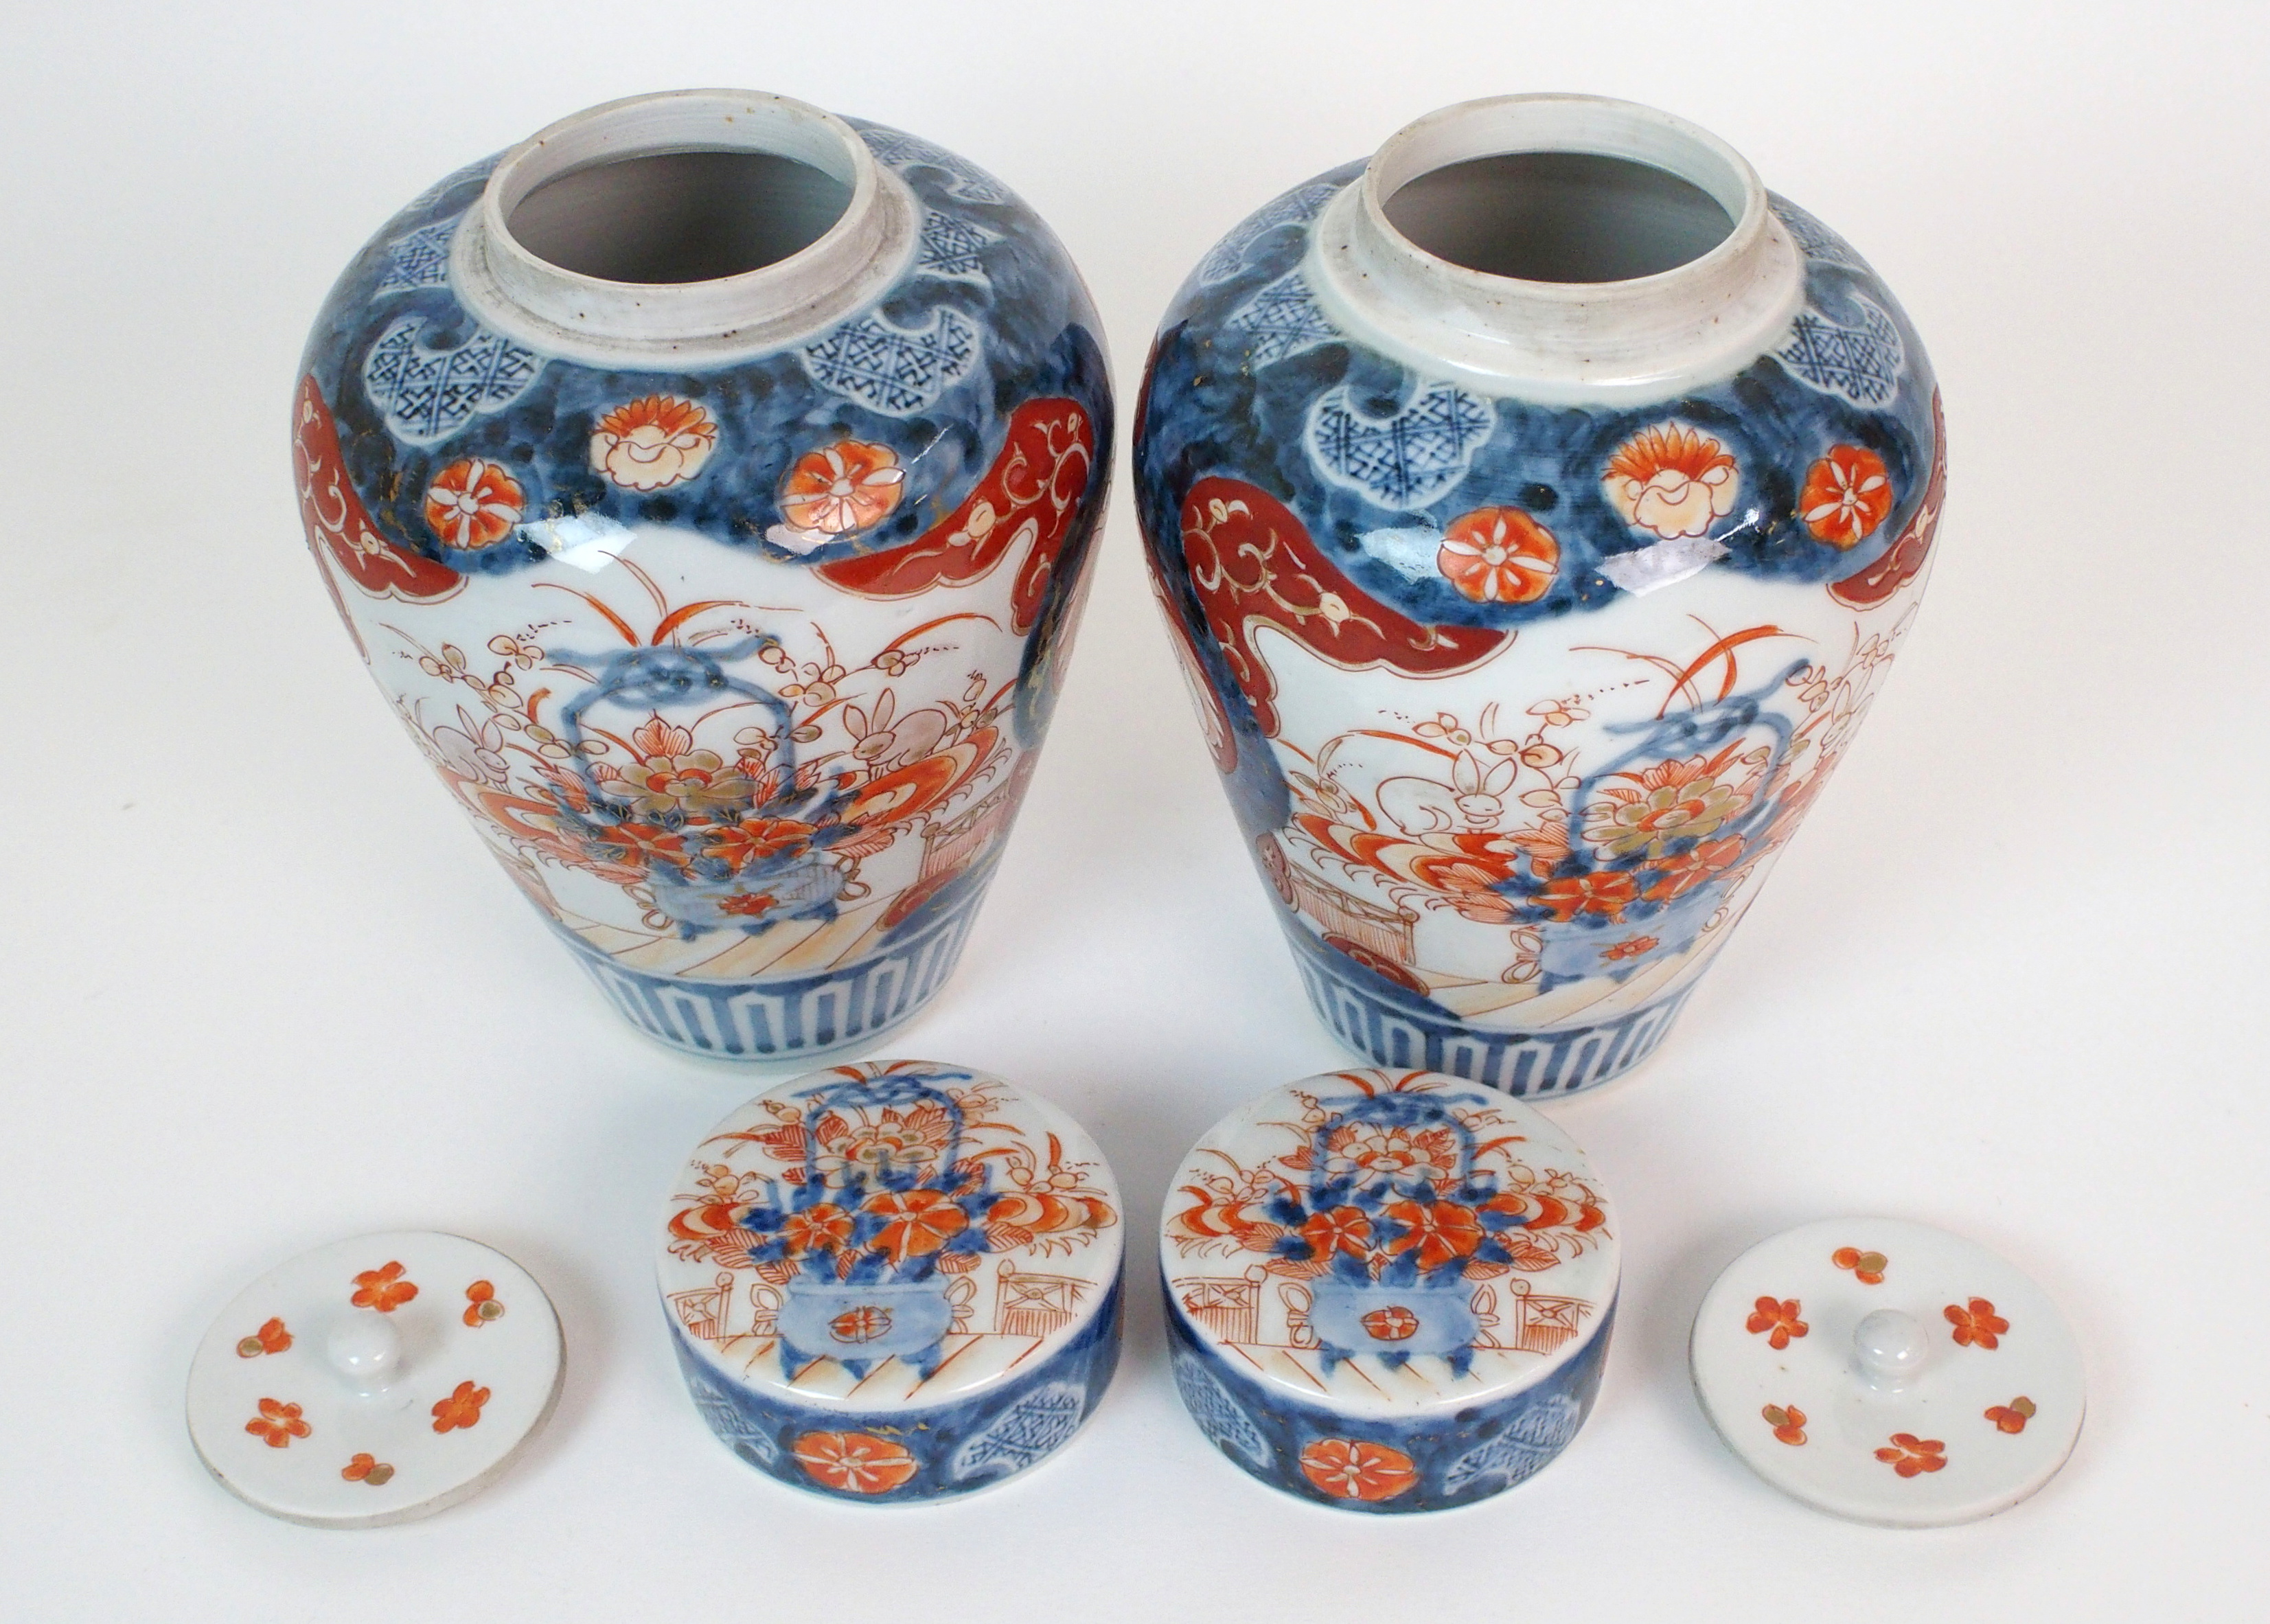 A pair of Imari baluster vases, covers and liners  painted with jardinieres of flowers and rabbits - Image 10 of 10